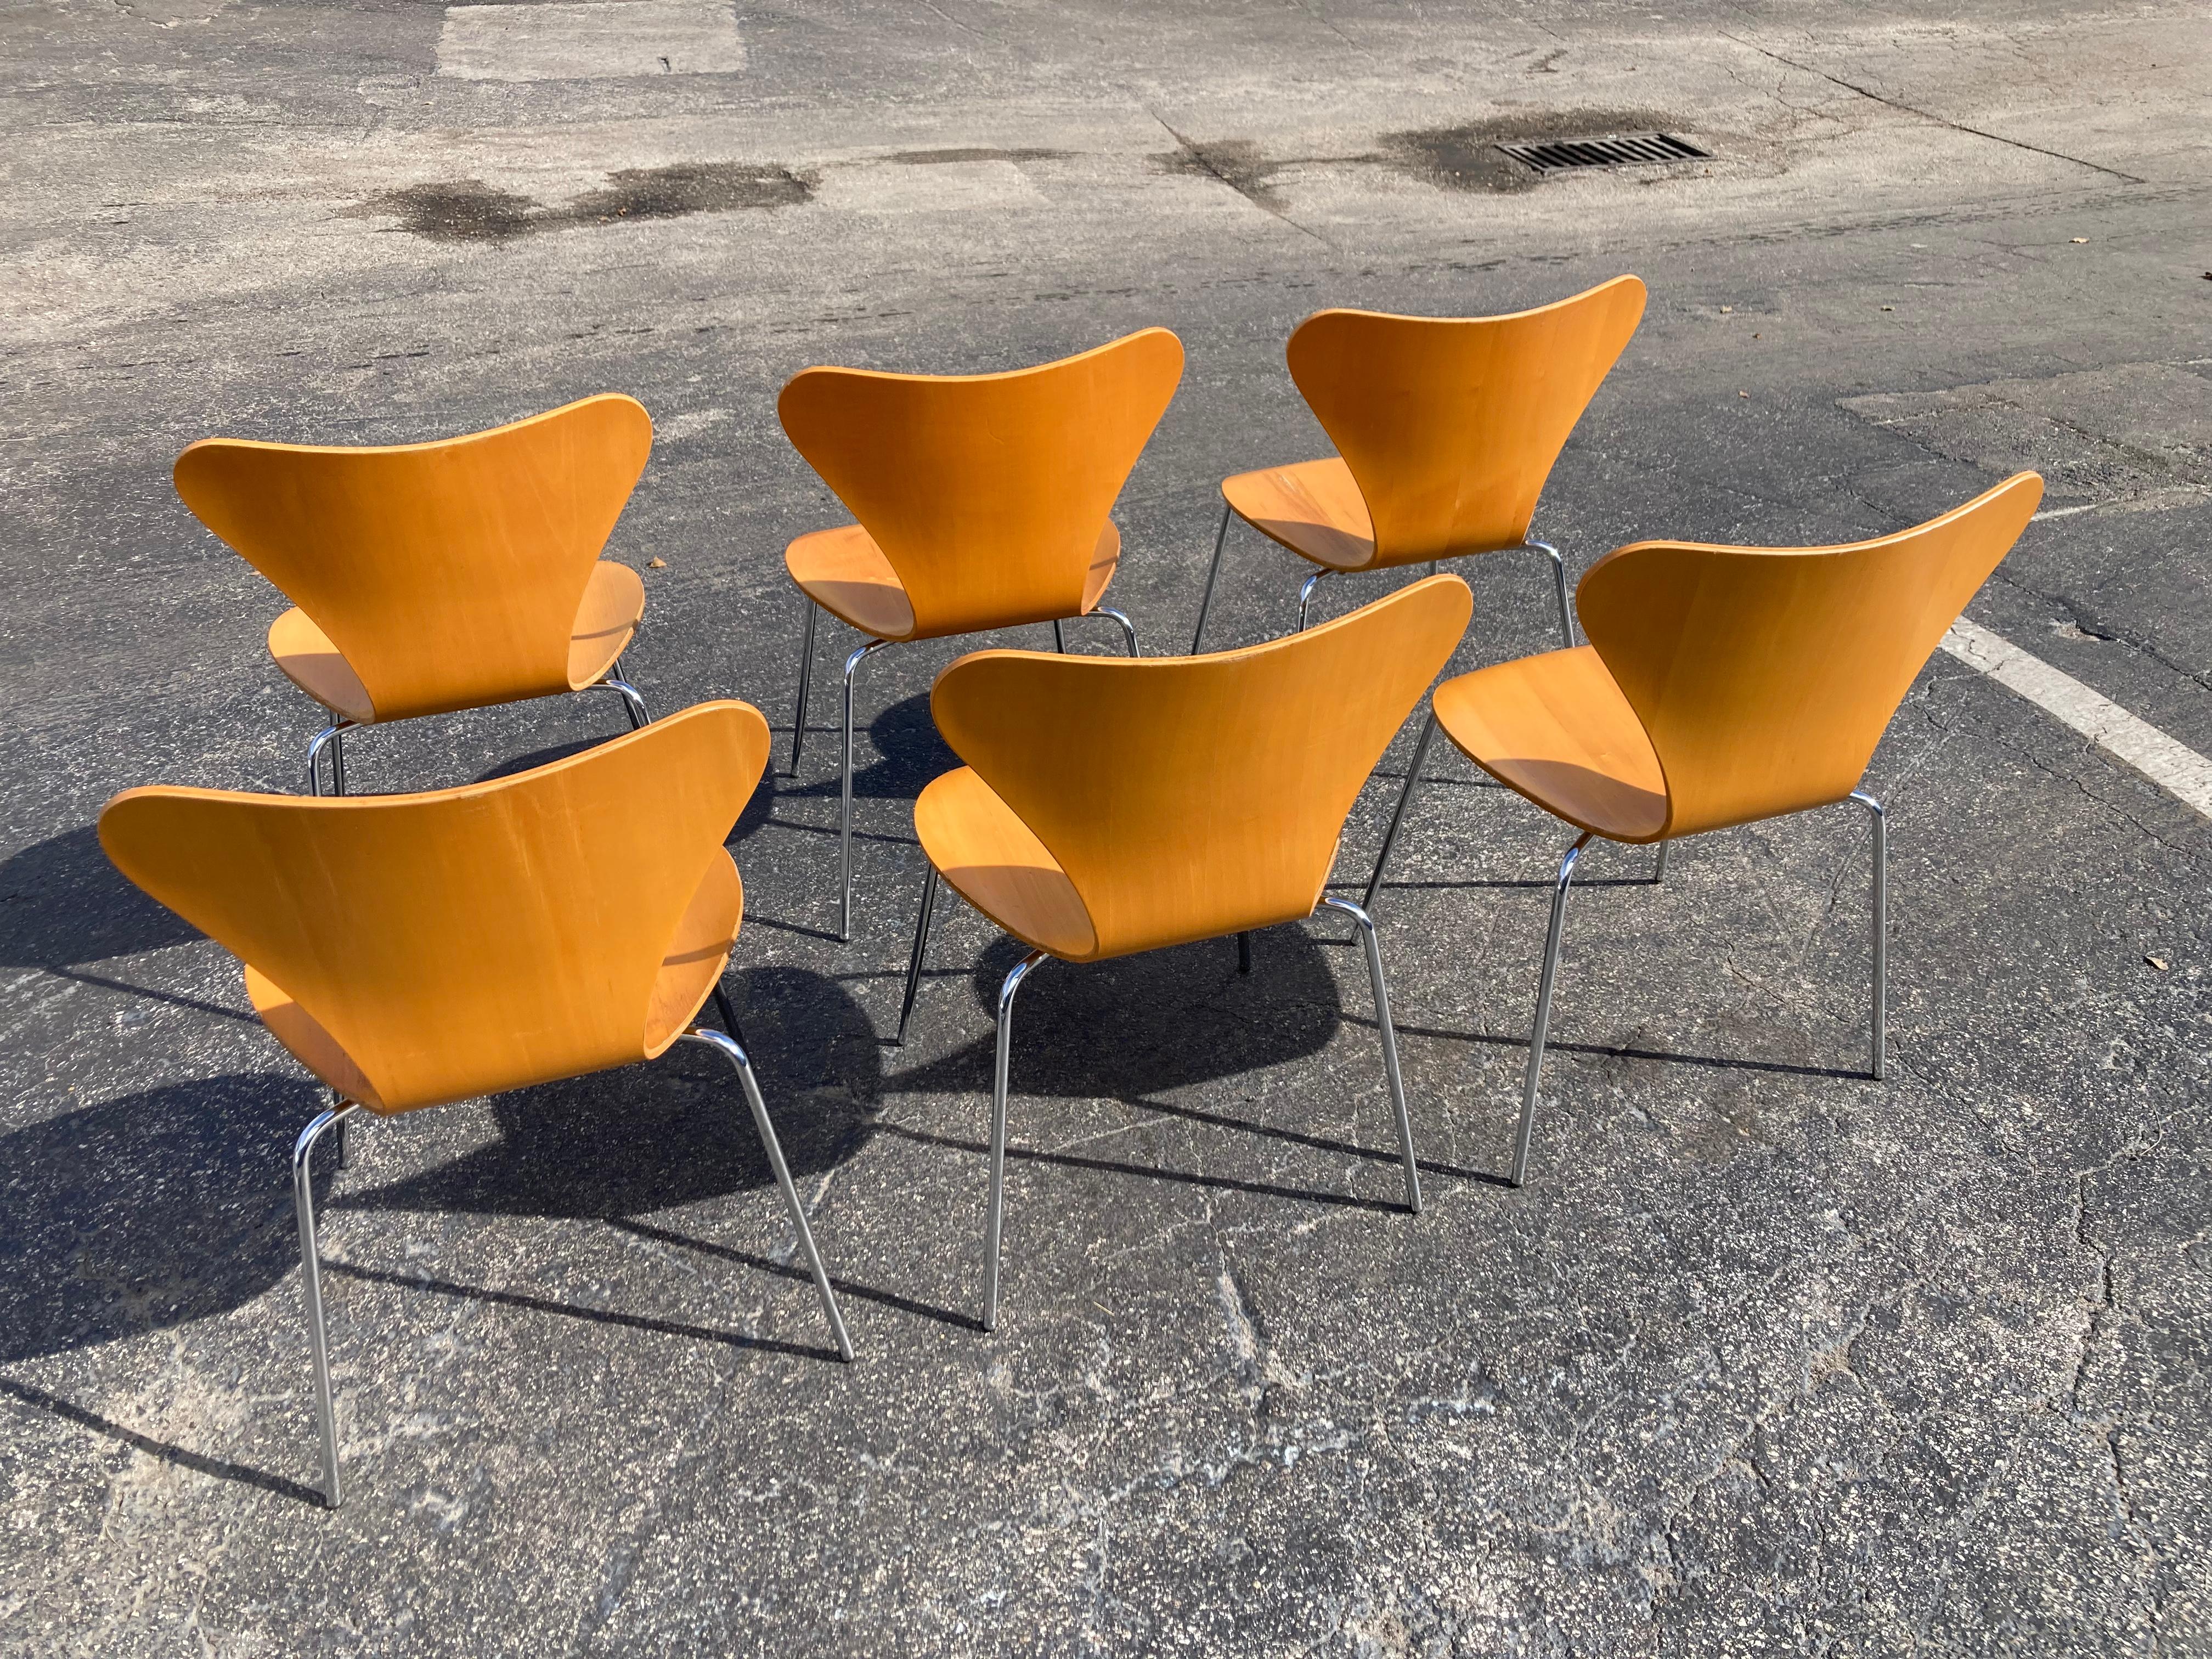 Arne Jacobsen Chairs Series 7 for Fritz Hansen In Good Condition For Sale In Miami, FL